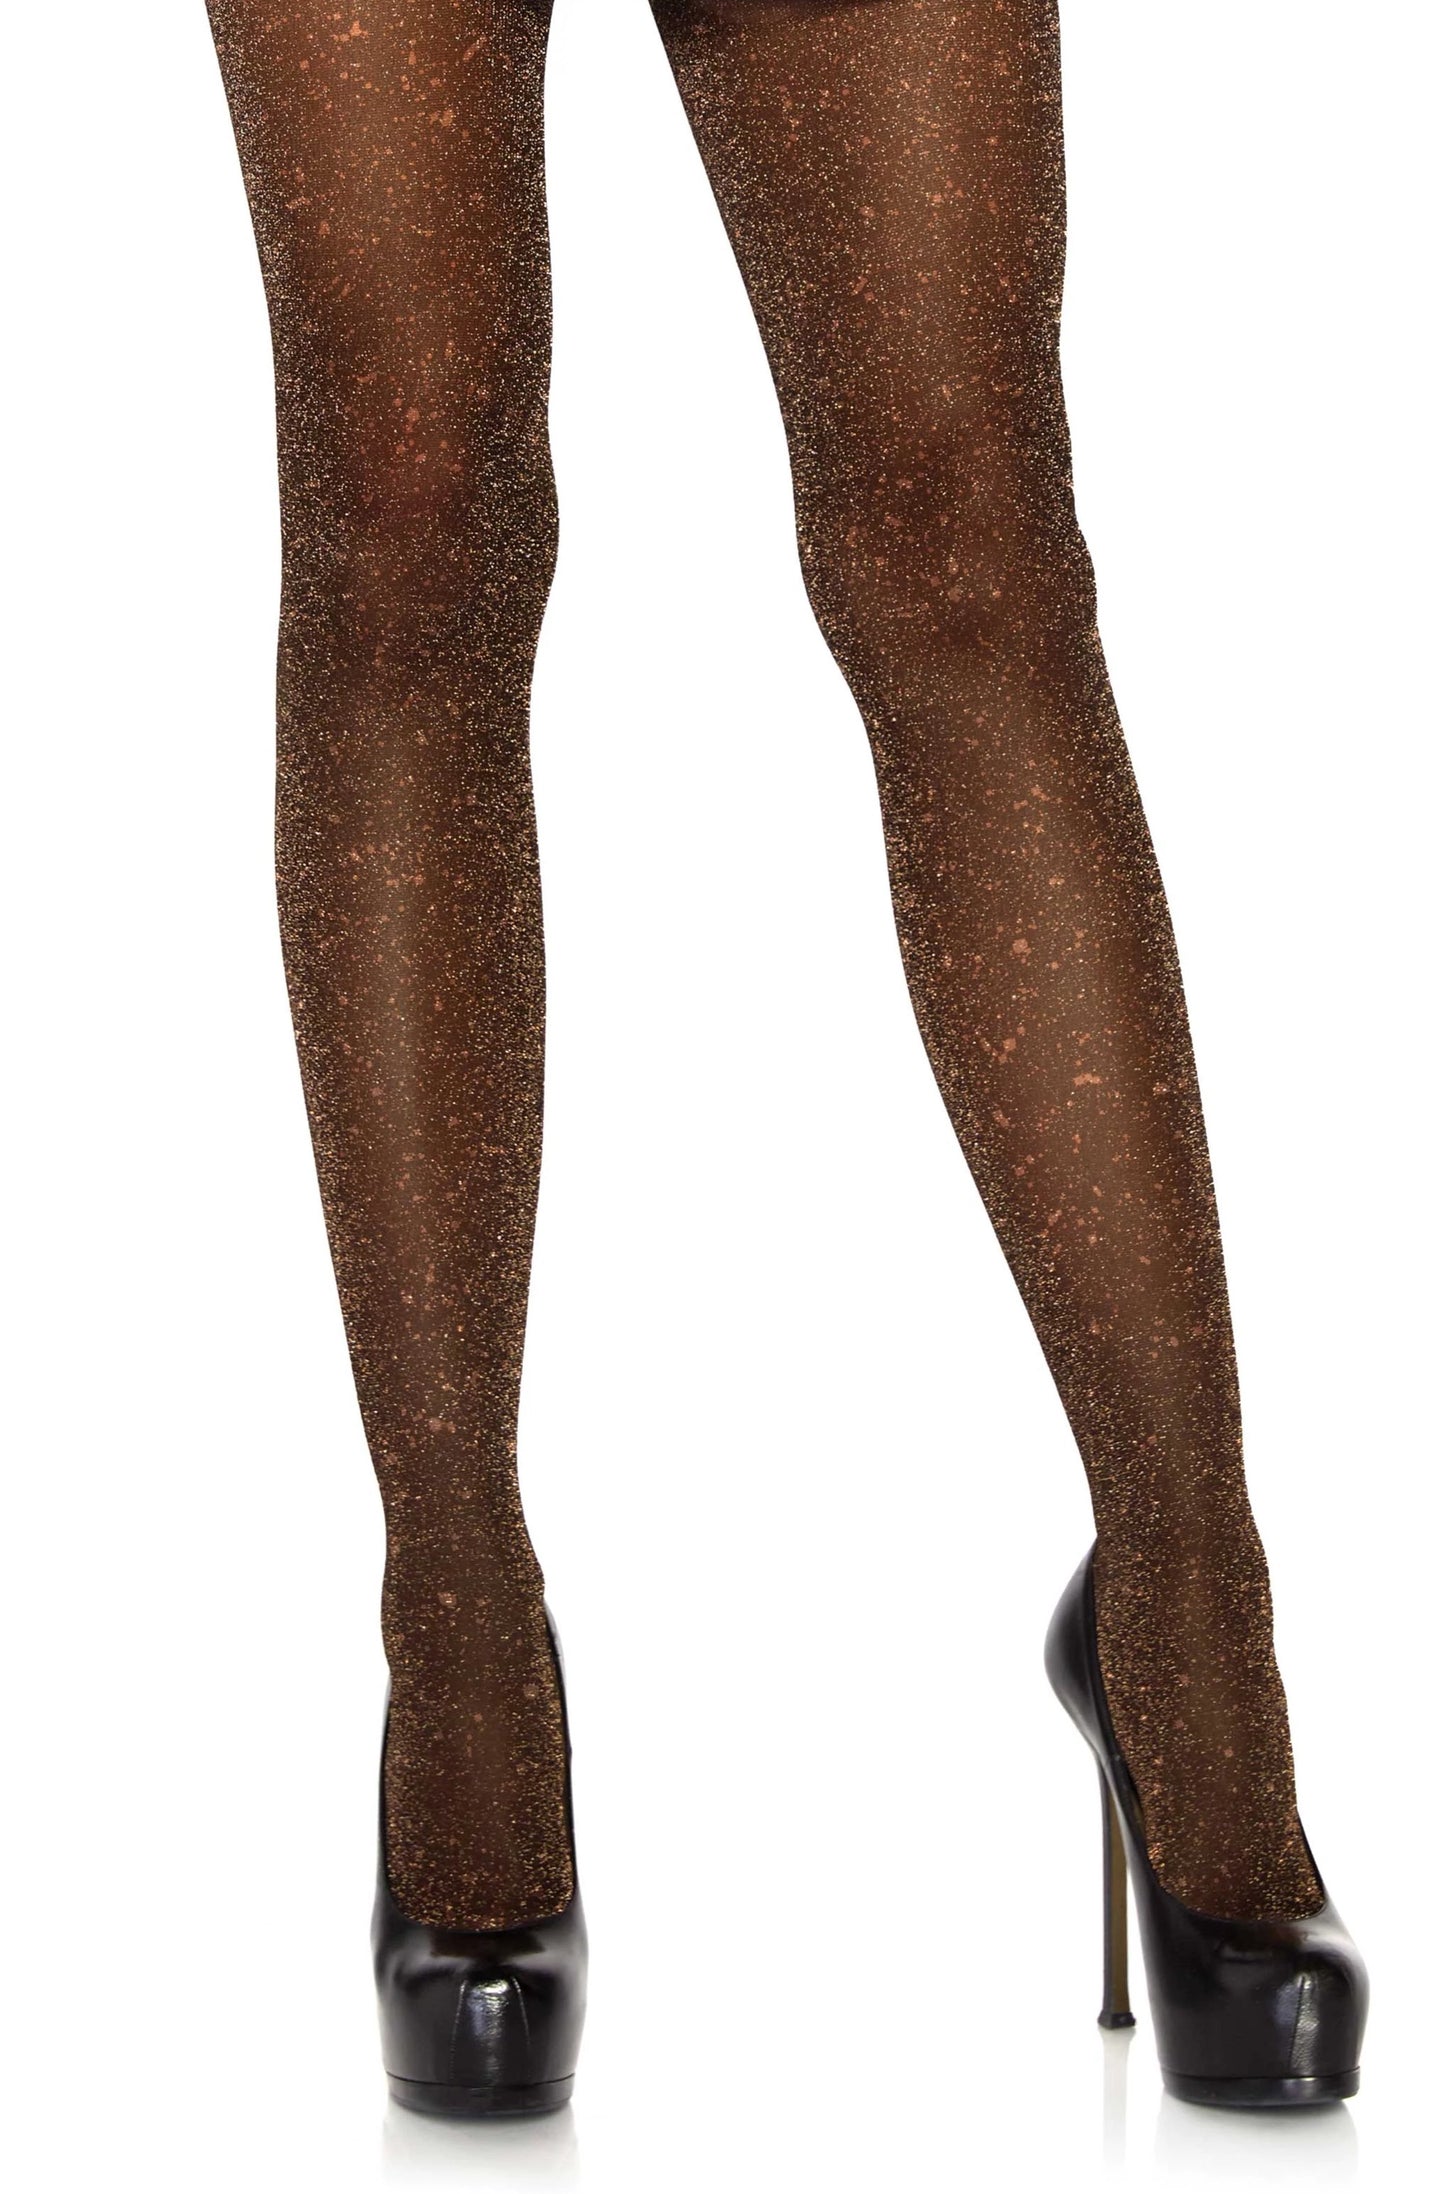 Leg Avenue 7130 Lurex sheer pantyhose - black and copper sparkly glitter tights